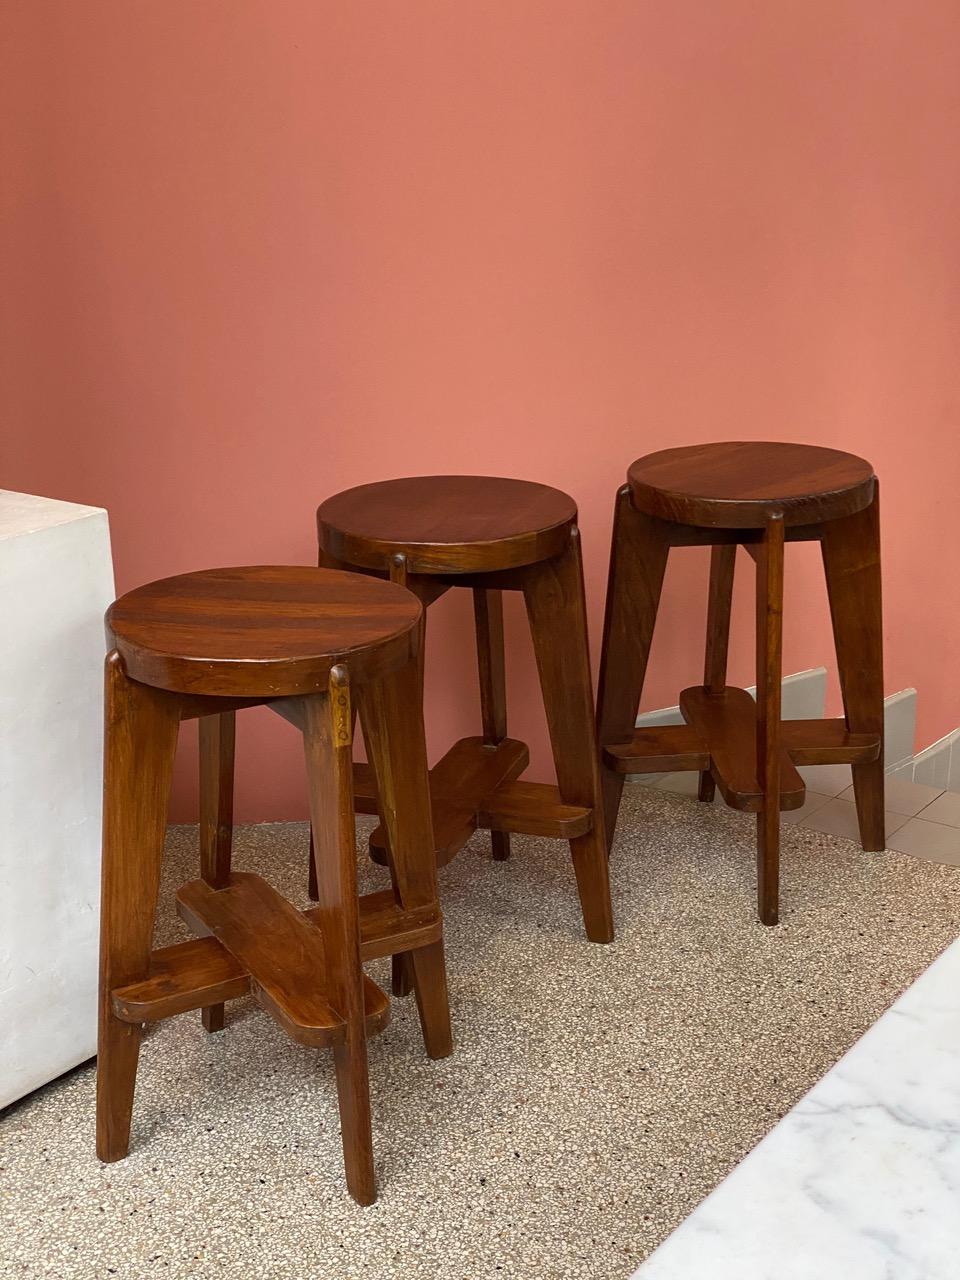 Indian Pierre Jeanneret, Stools, circa 1965